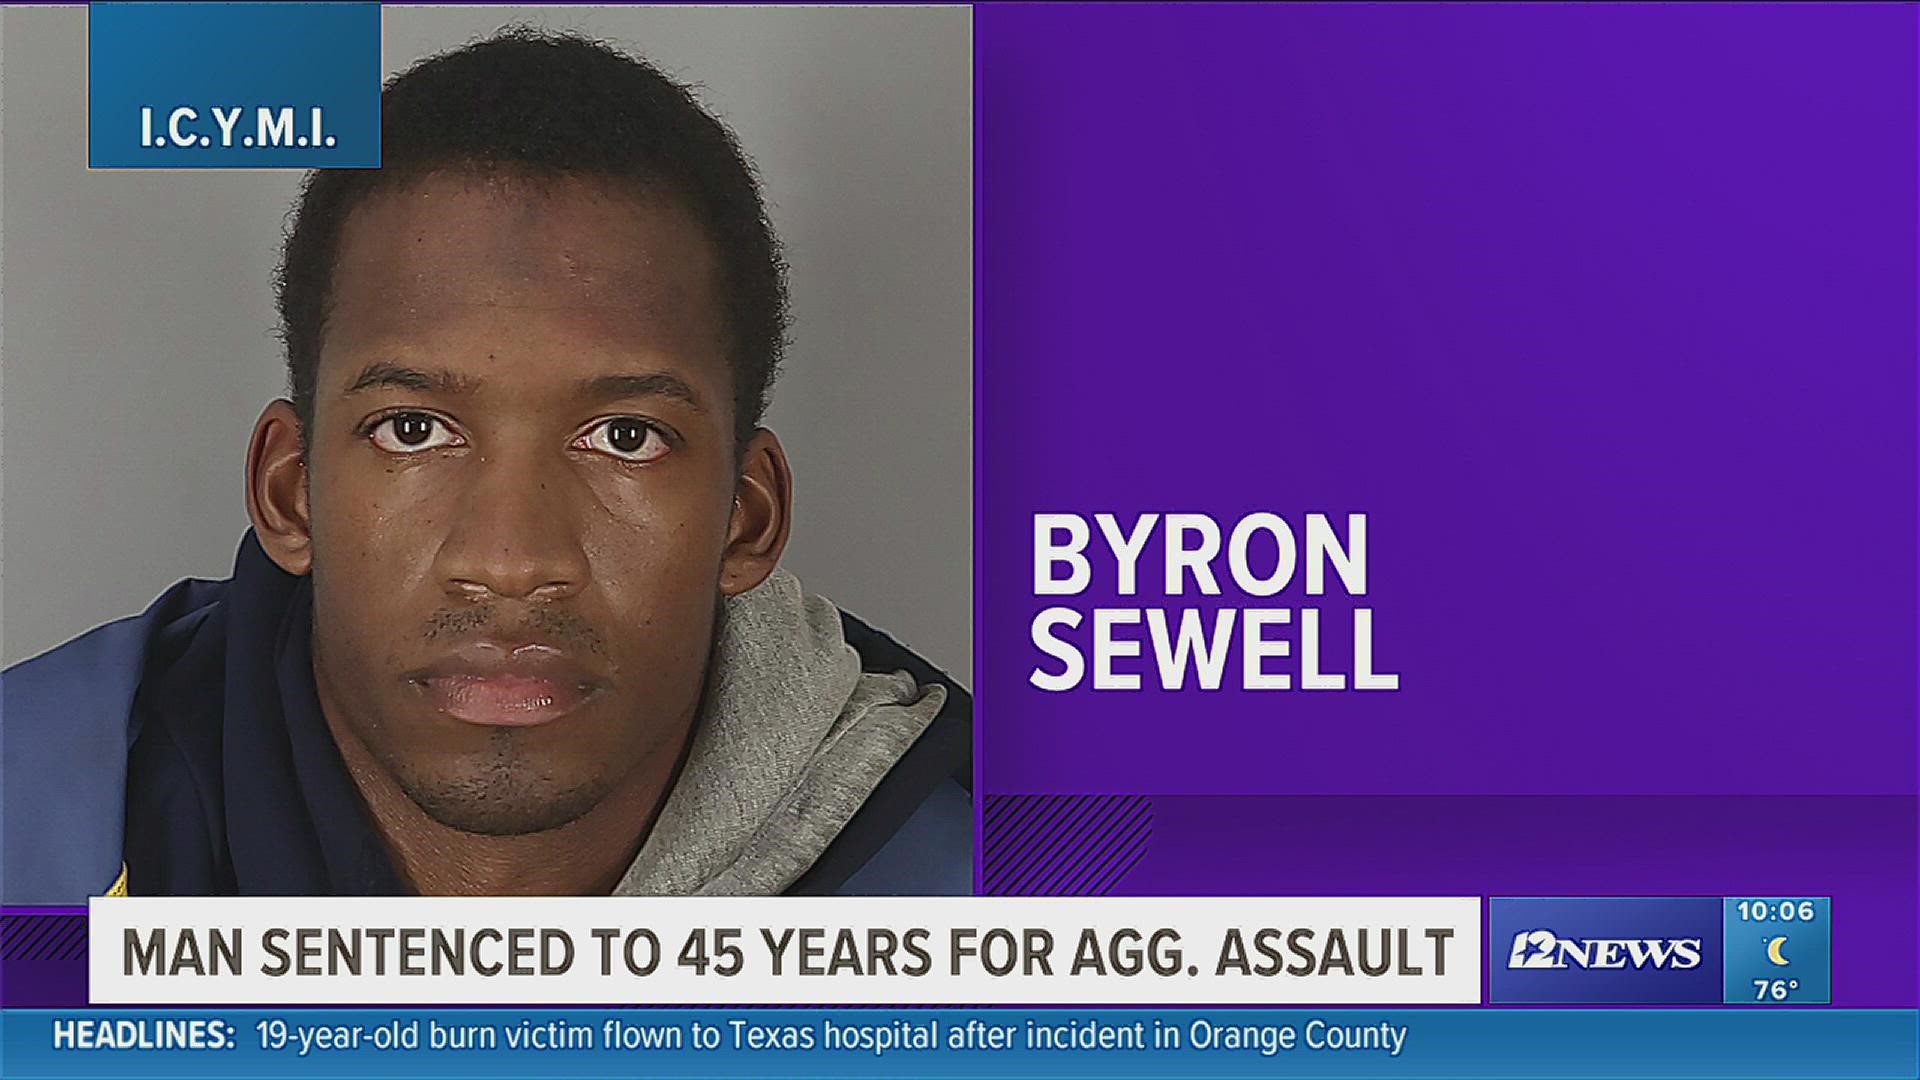 I.C.Y.M.I Man found guilty of violently stabbing his ex-girlfriend more than 15 times in 2019 sentenced to 45 years 12newsnow